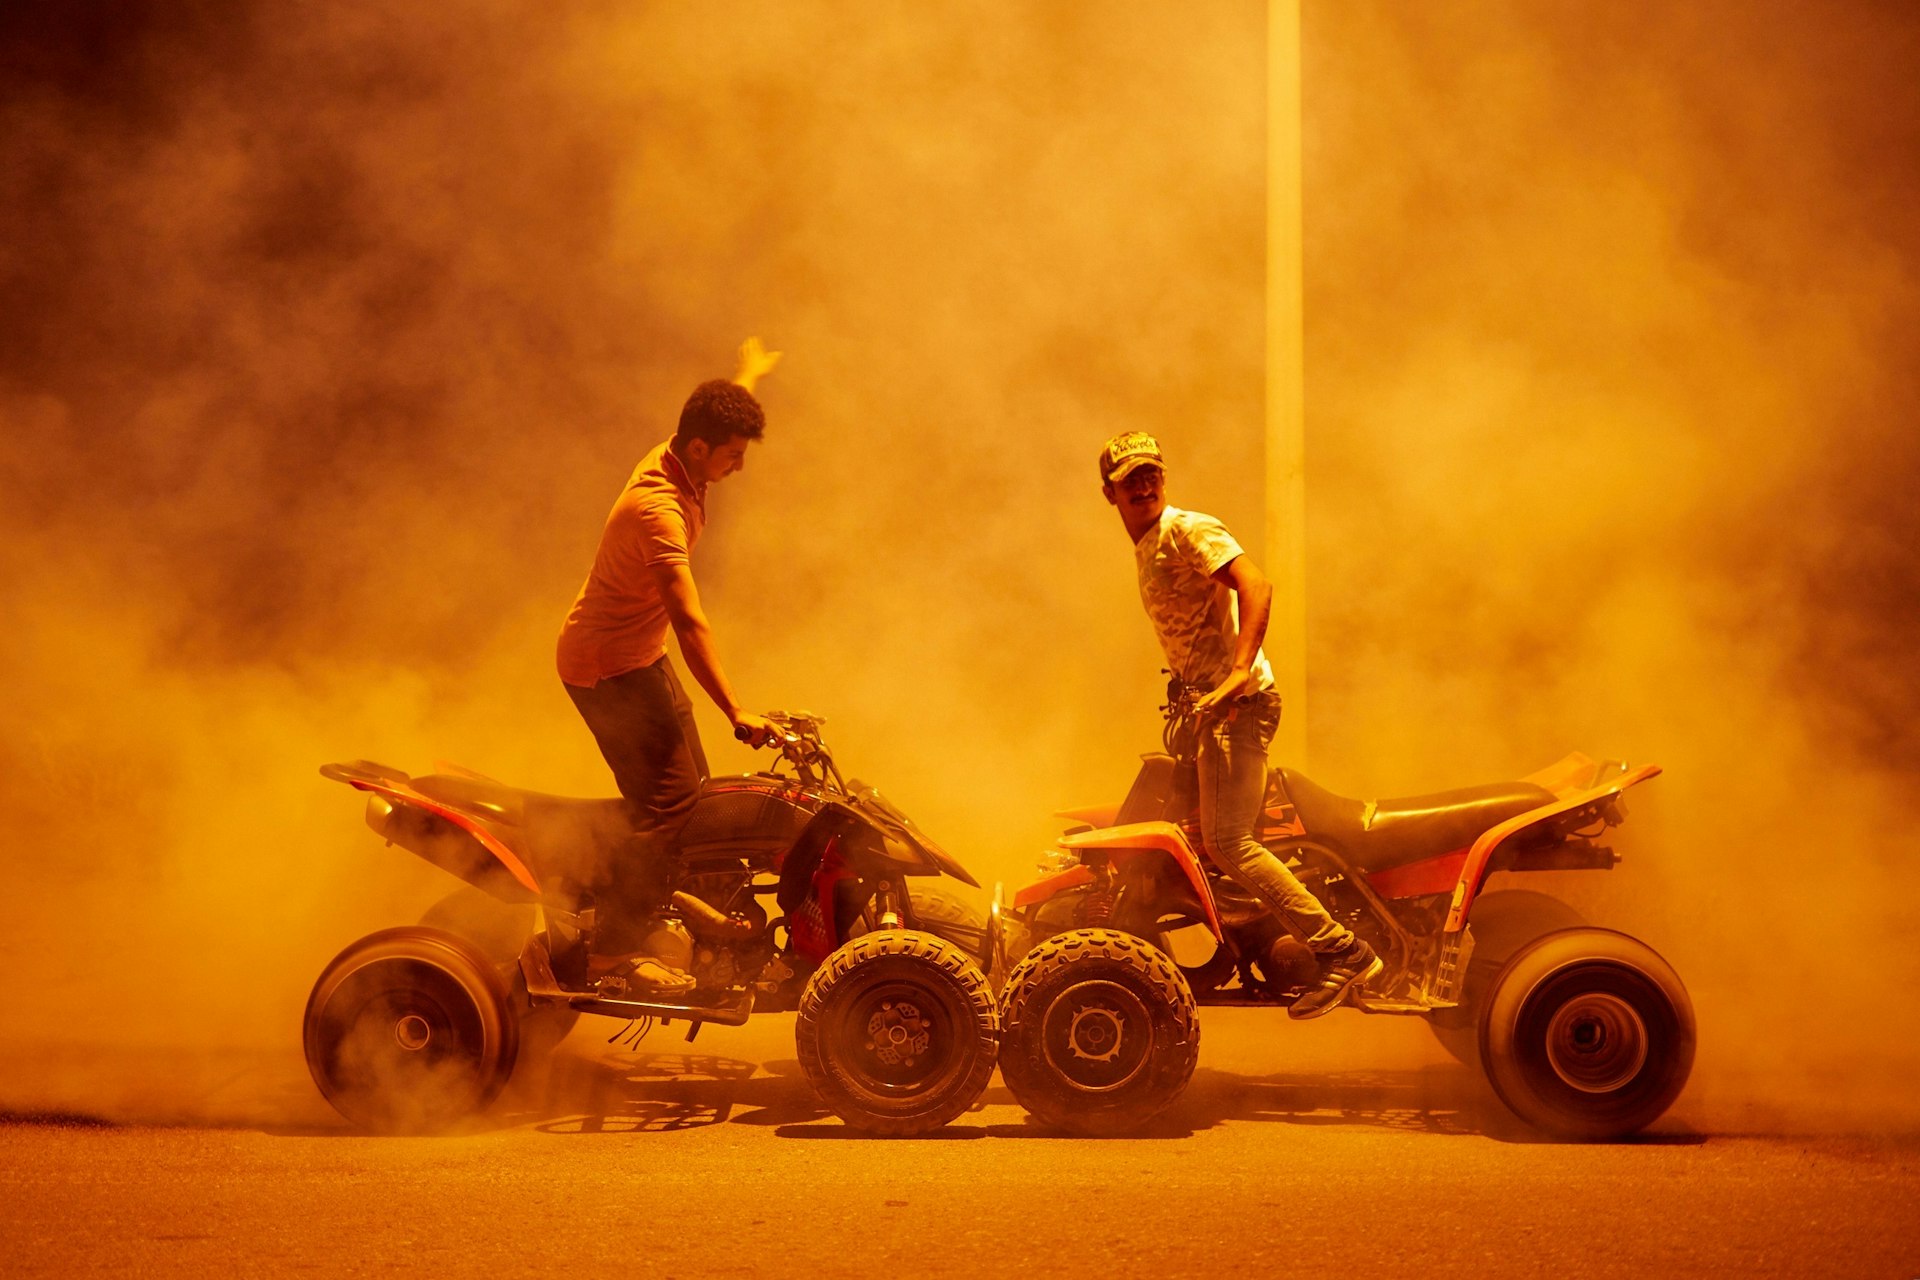 Oman’s urban quad bikers are reclaiming the roads